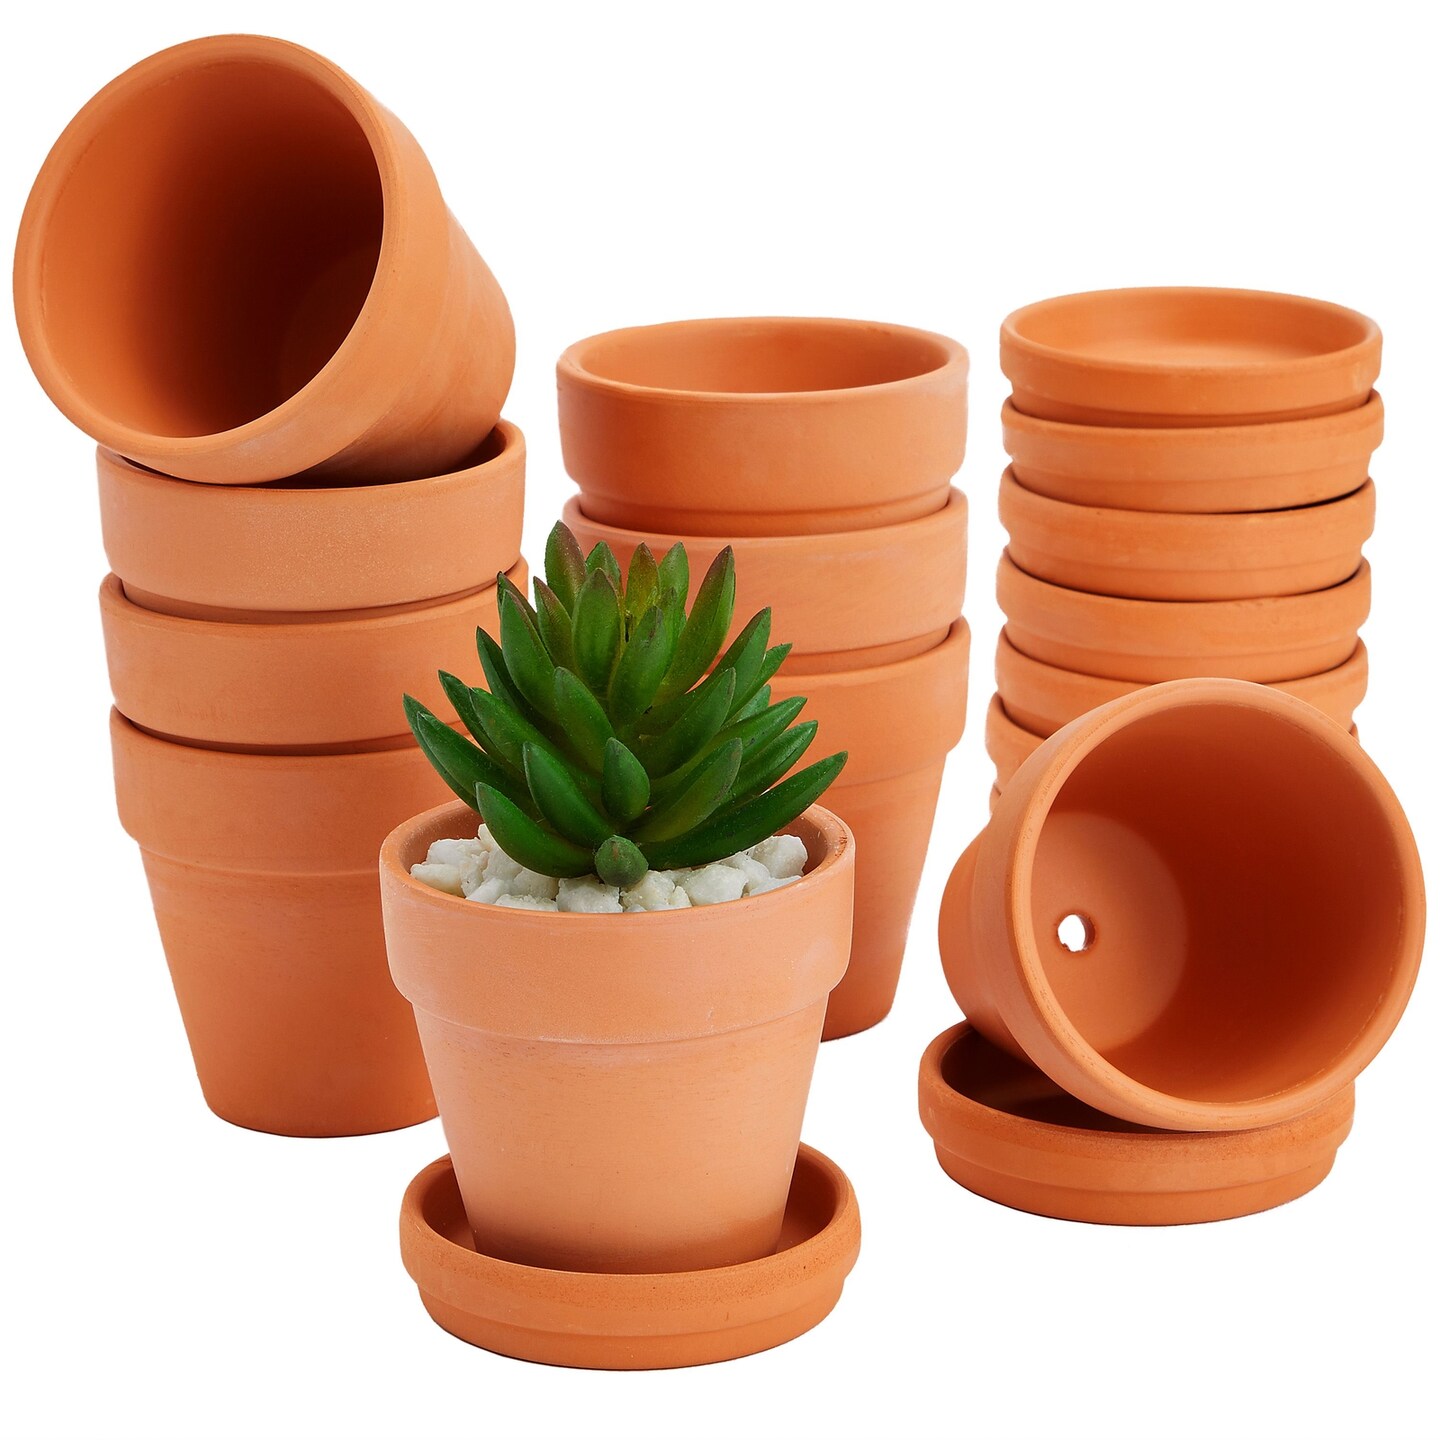 6-Pack Small Terra Cotta Pots with Saucer and Drainage Hole, 4